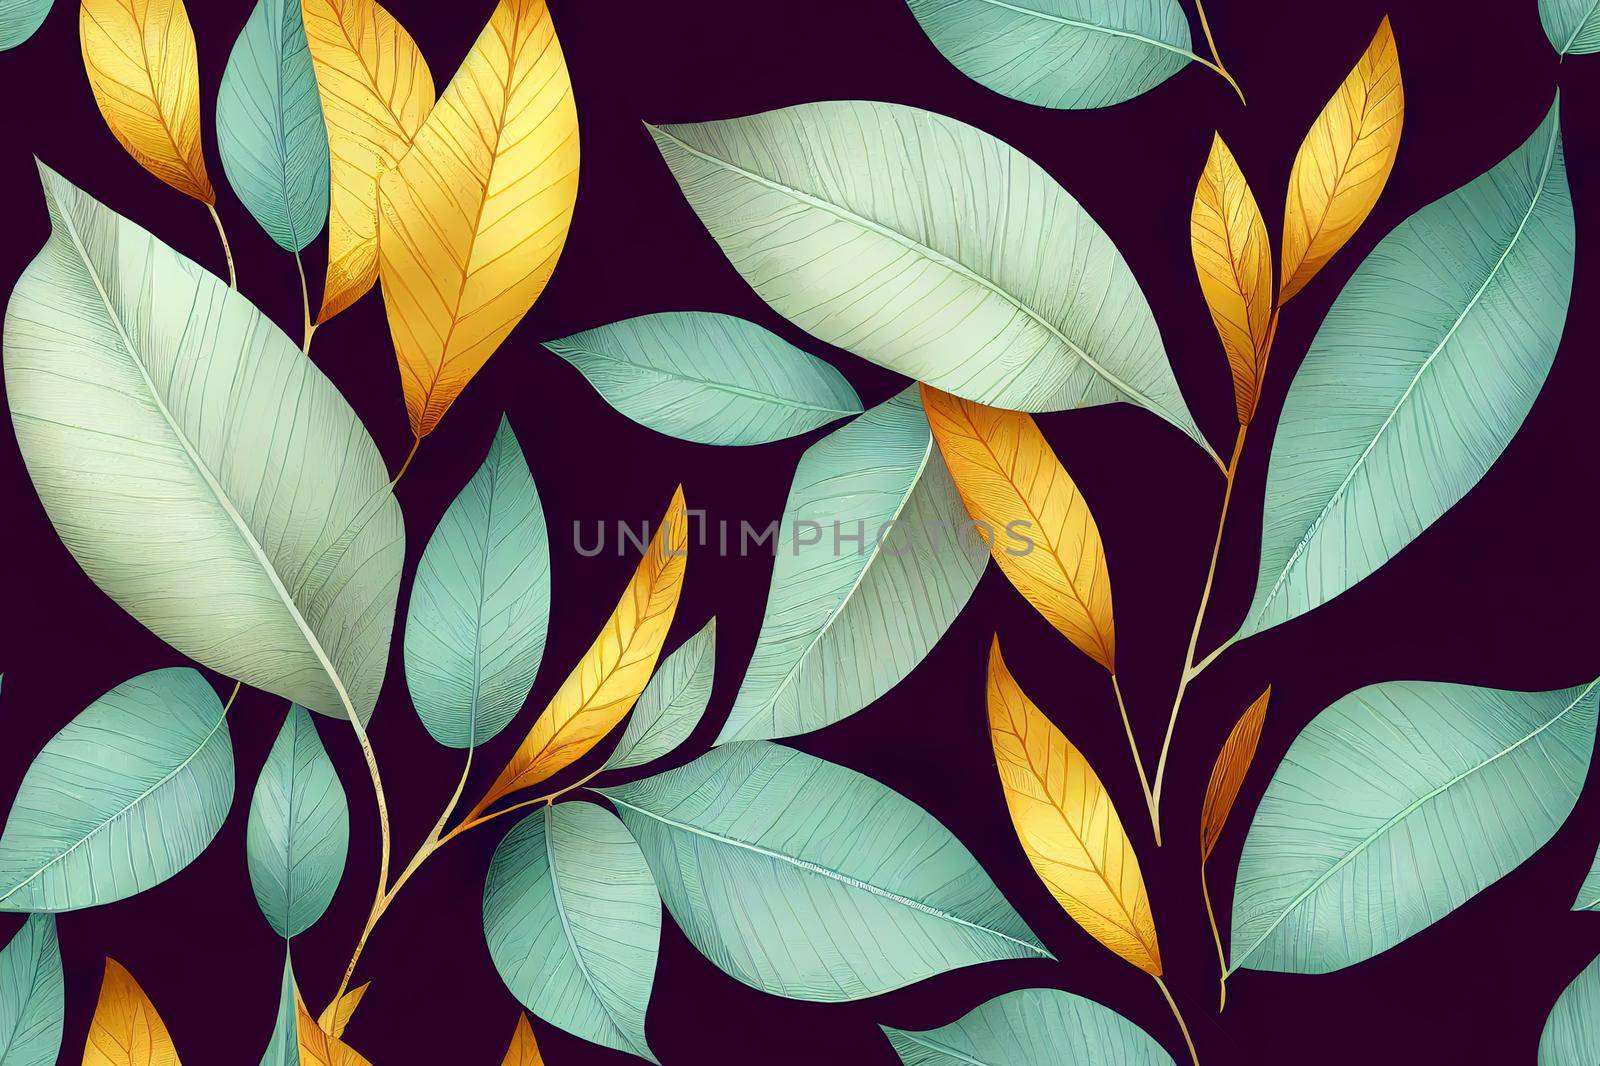 Dark tropical leaves seamless botanical pattern. Night jungle leafy background. Autumn foliage allover repeating print